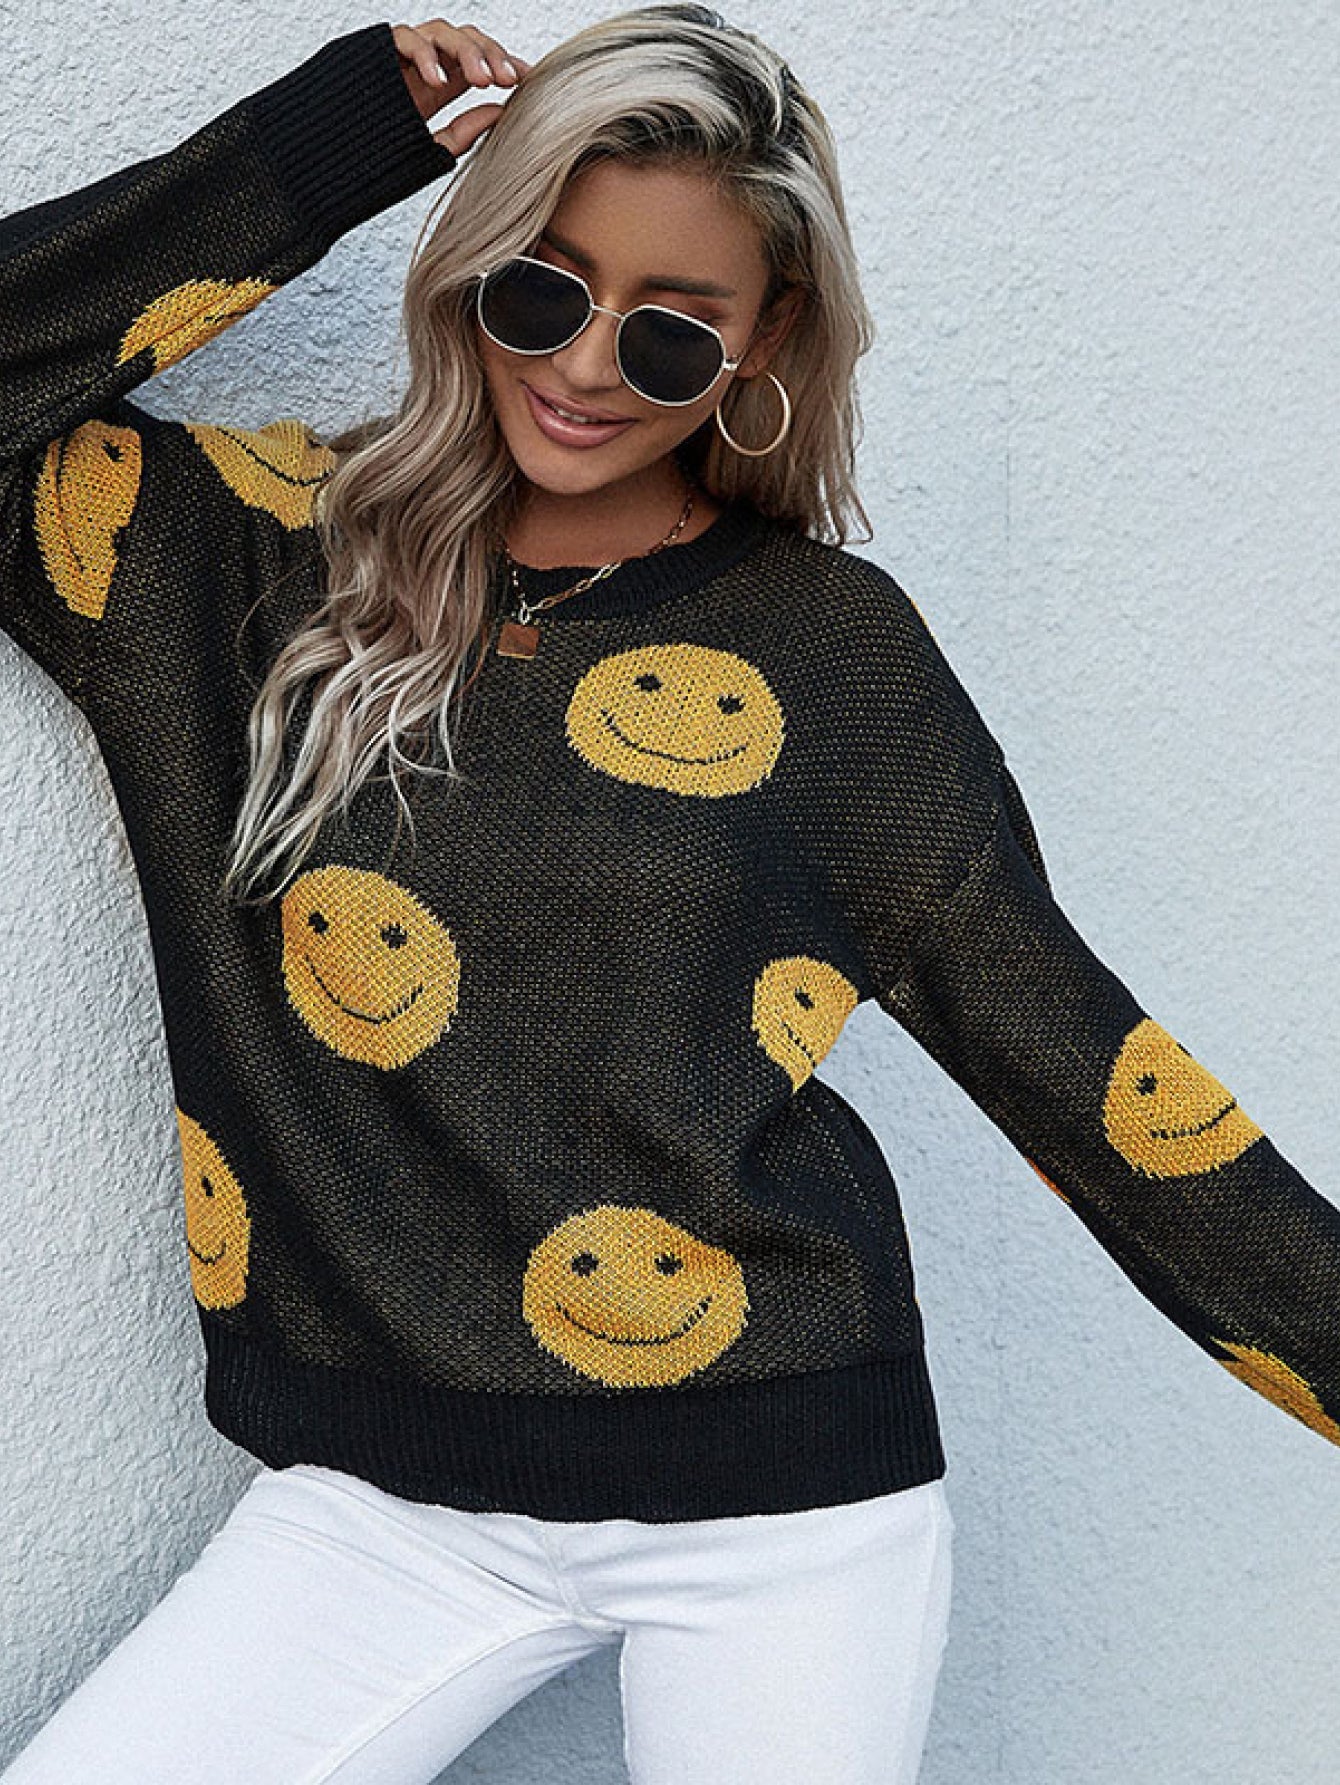 Smiley Face Sweater  | KIKI COUTURE-Women's Clothing, Designer Fashions, Shoes, Bags